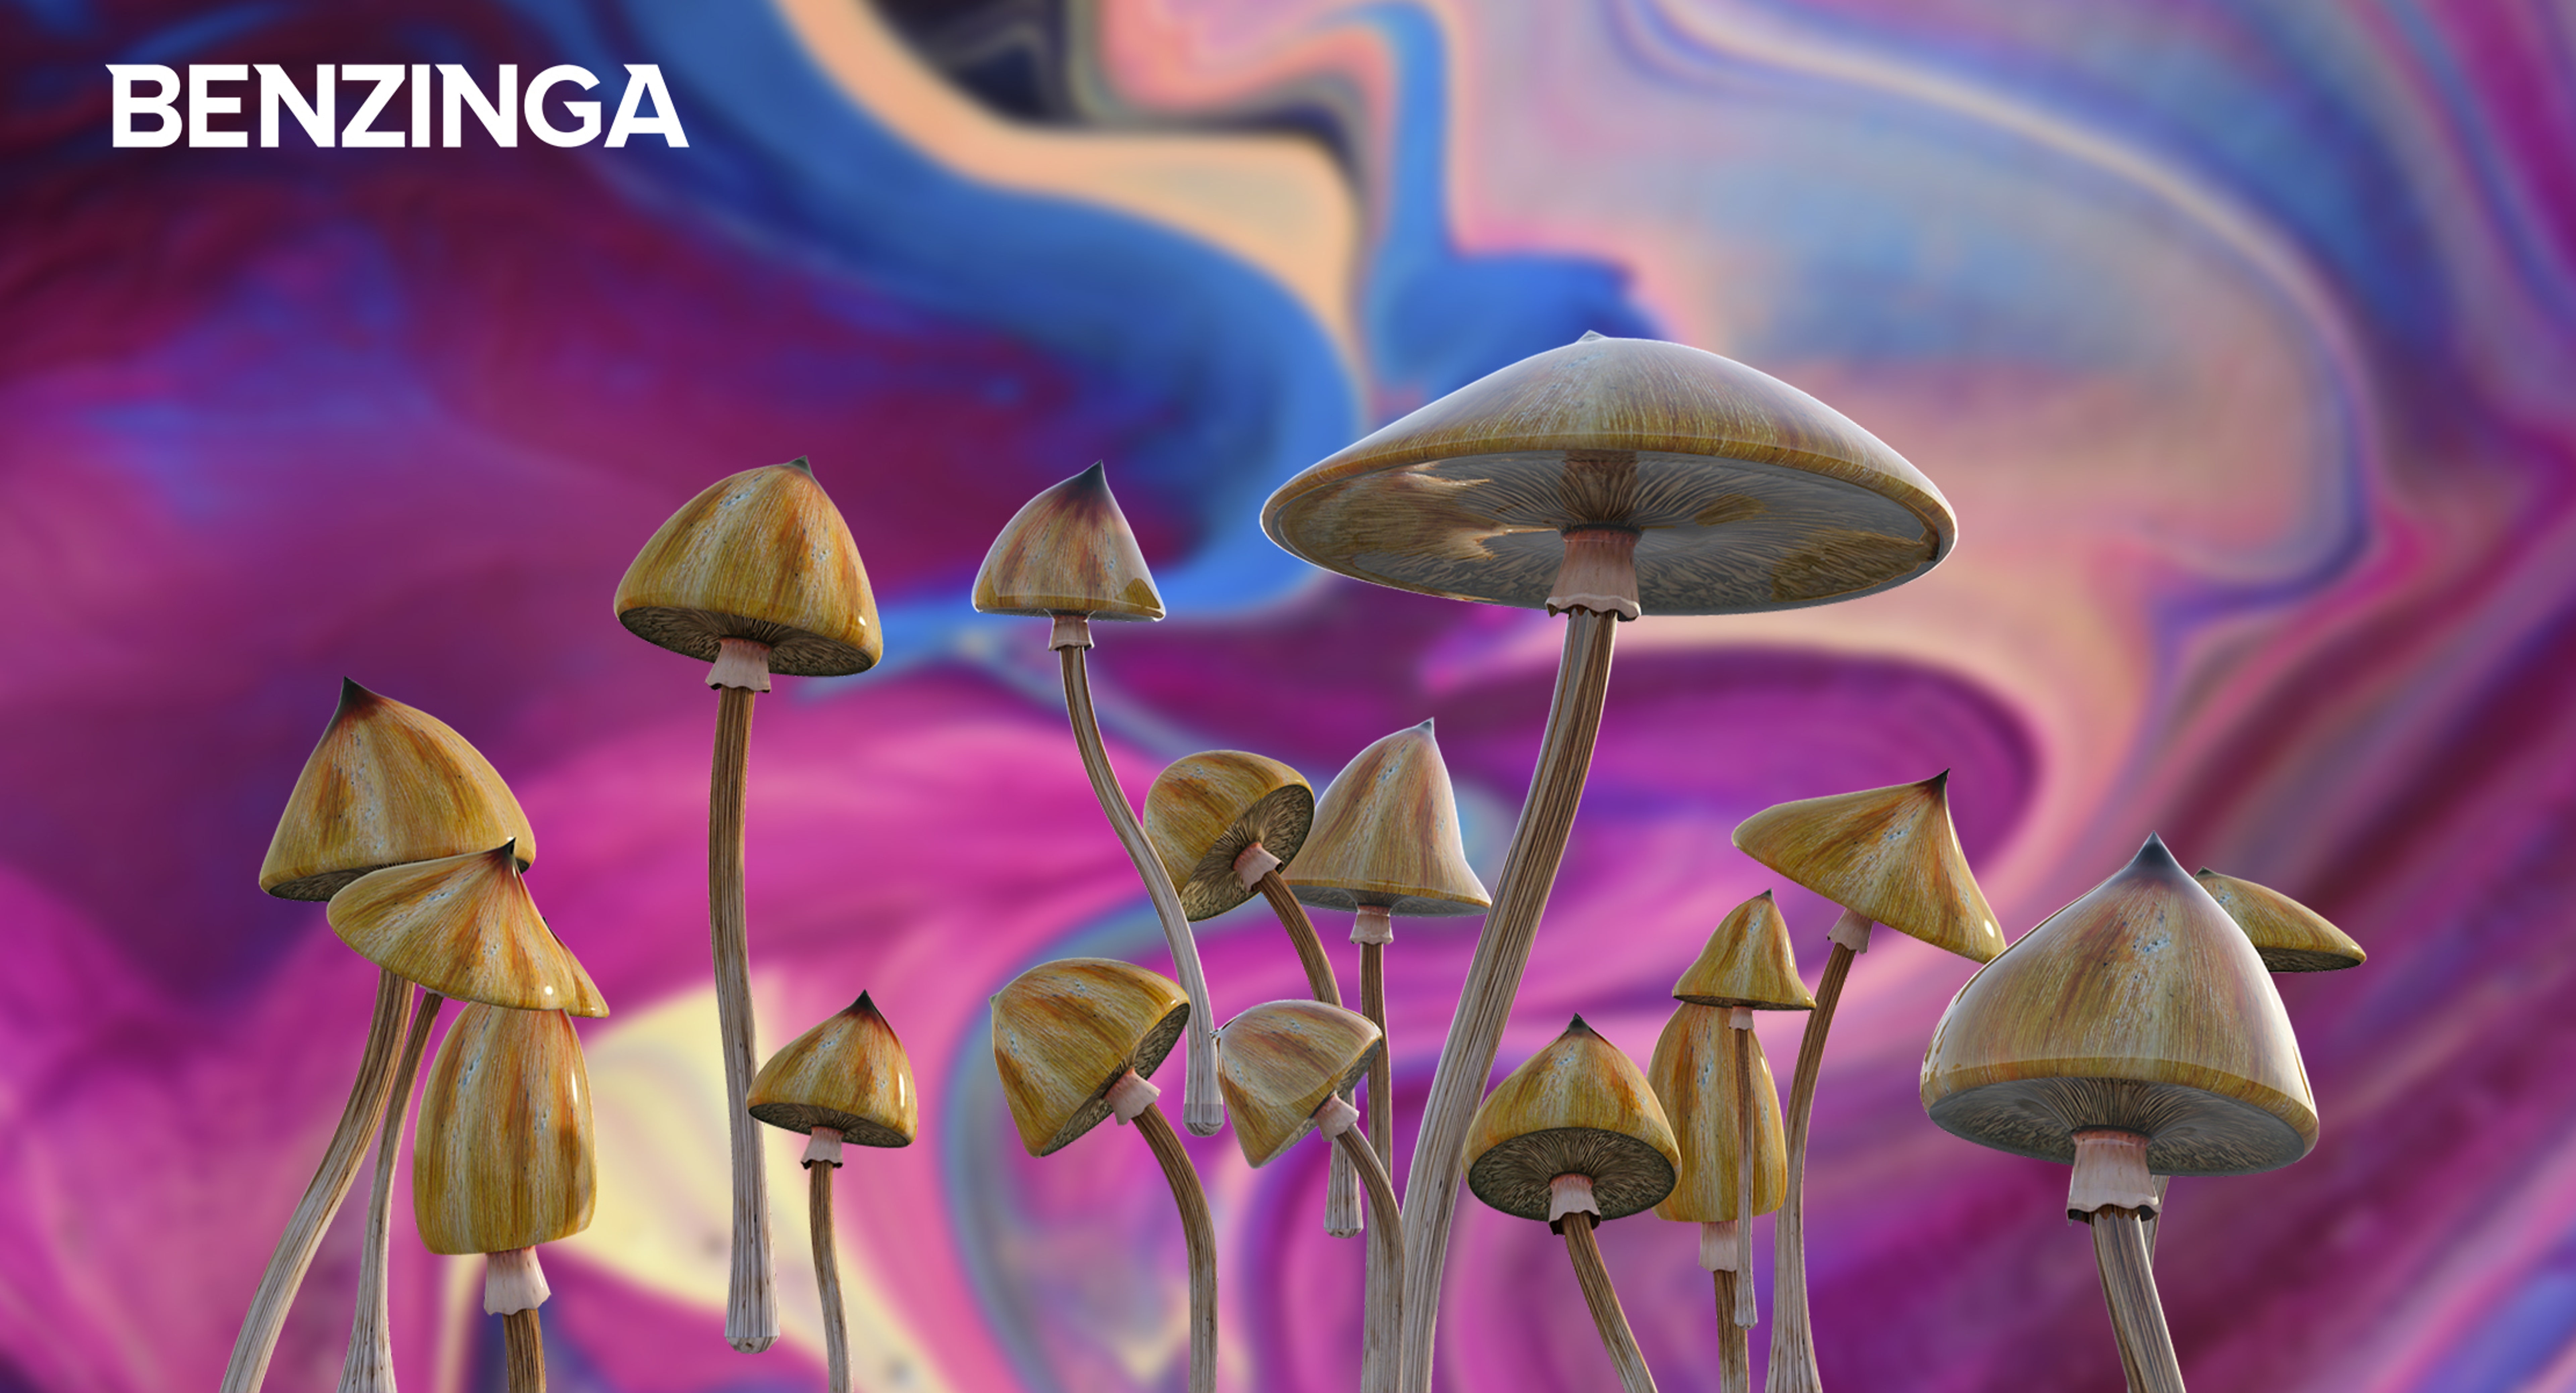 EXCLUSIVE: How Psilocybin Services Providers Are Facing Oregon&#39;s County &#39;Opt-Out&#39; Vote In November Ballot, Synthesis&#39; Exposition In Jackson County